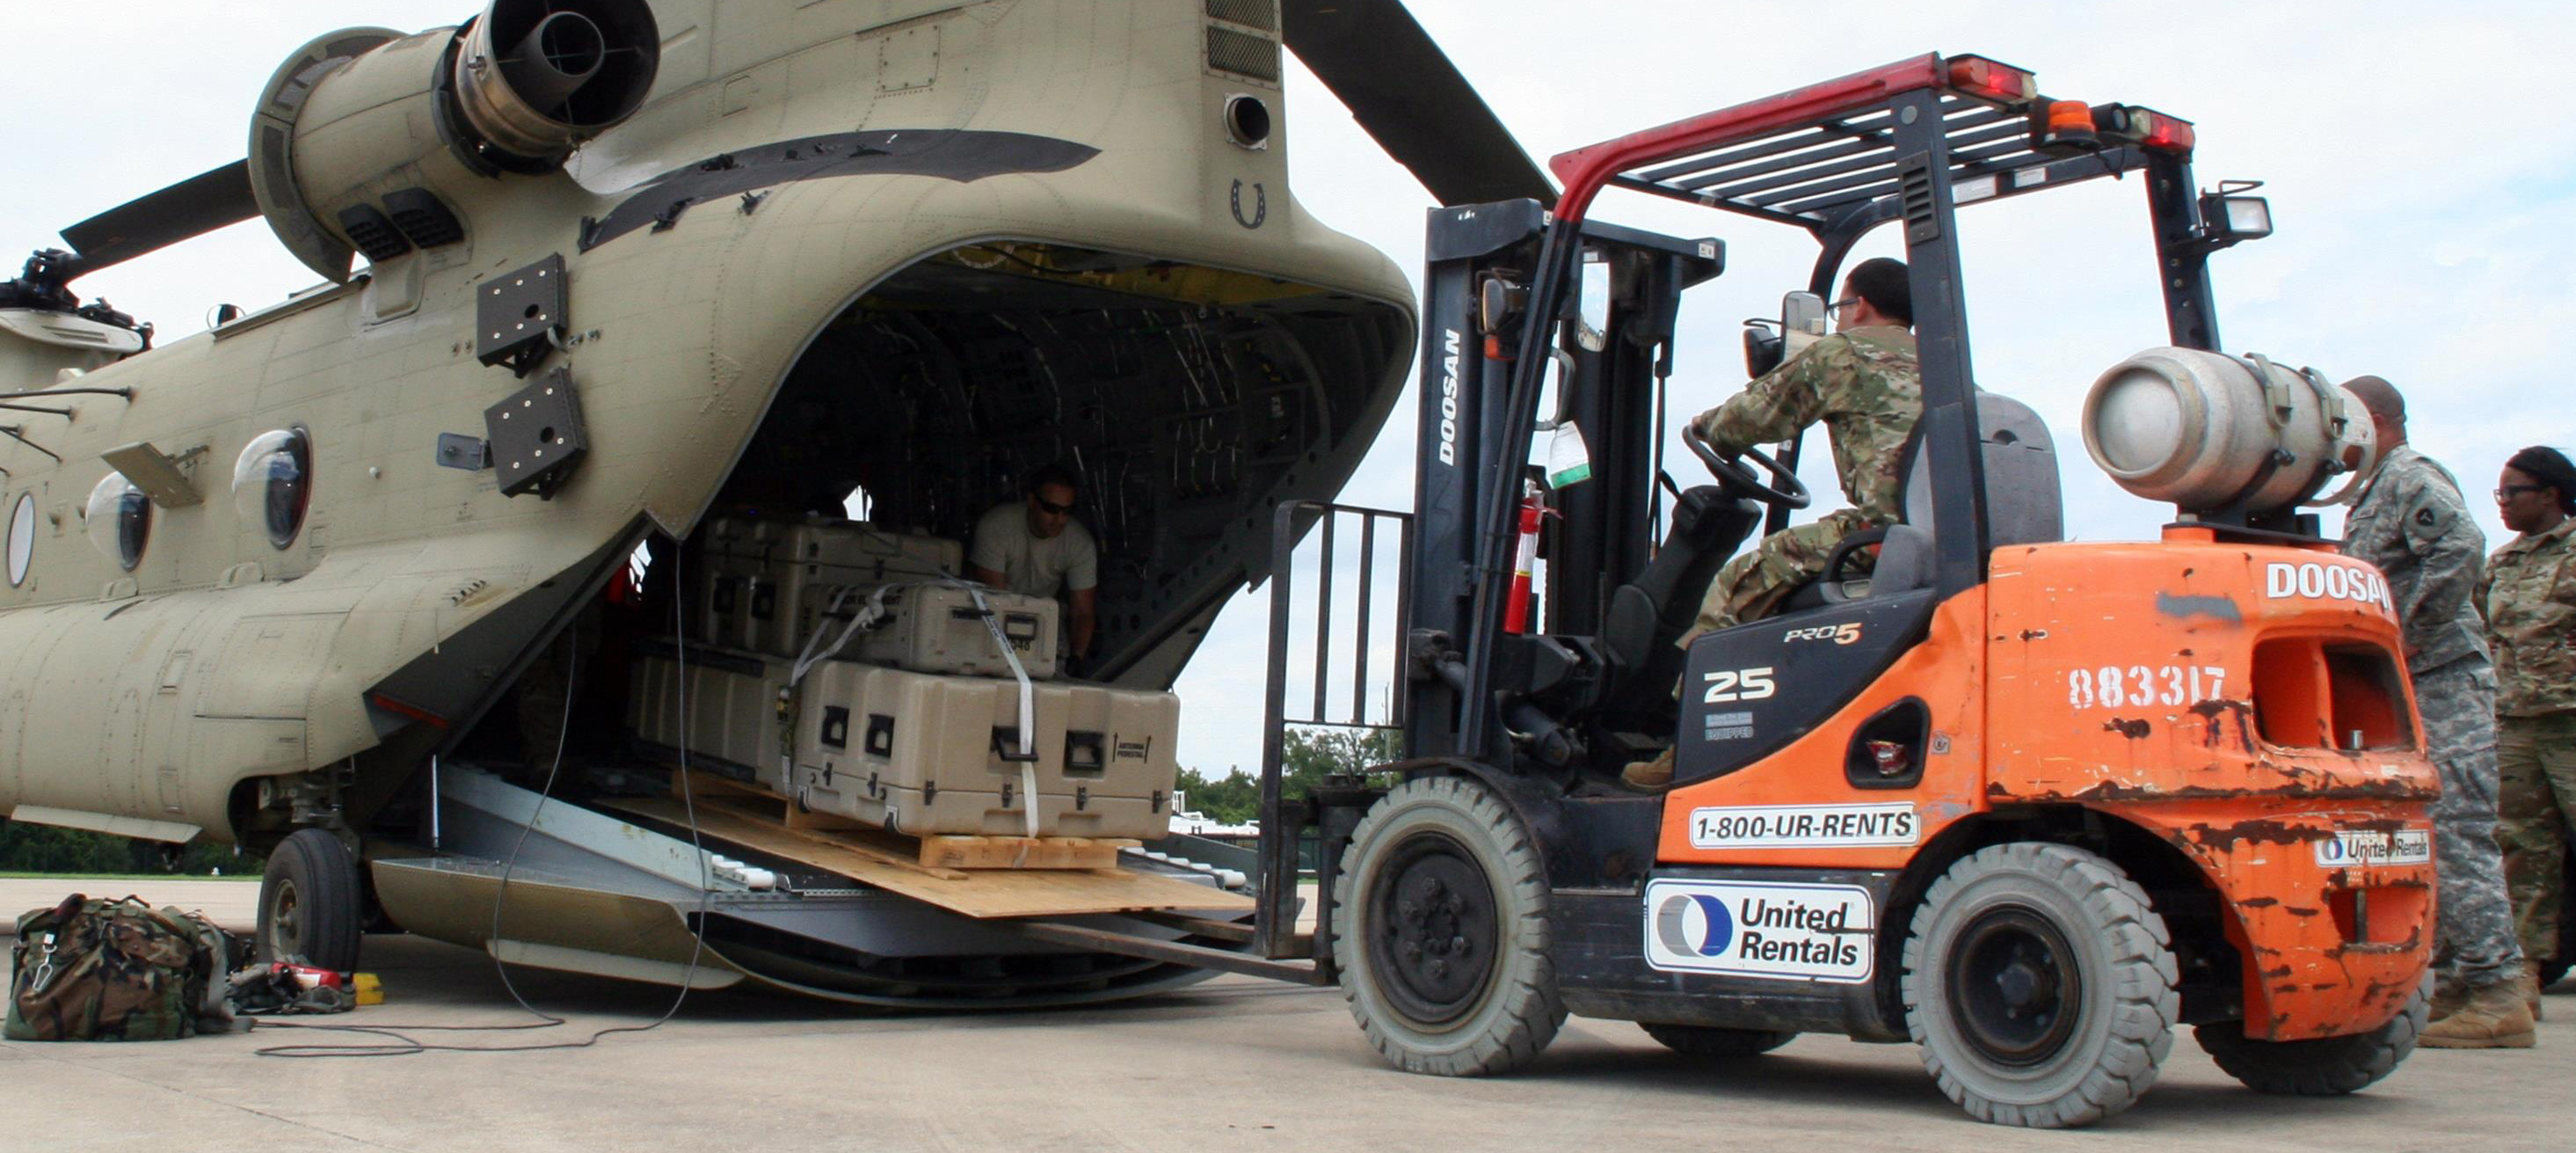 Image of a forklift driver loading a pallet of boxes onto the back of a military aircraft